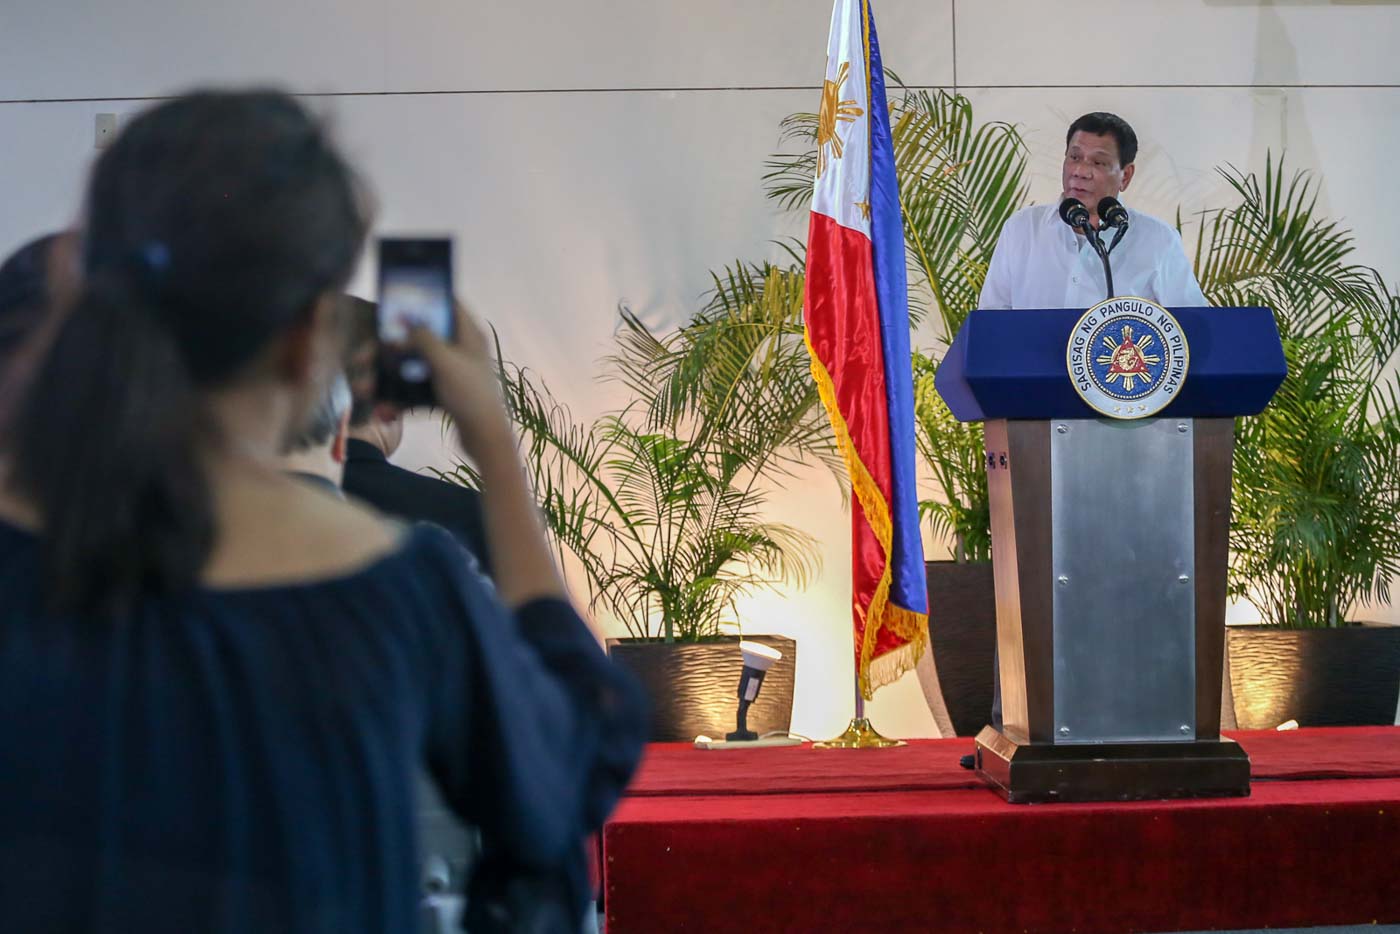 DEPARTURE SPEECH. President Rodrigo Duterte delivers a message at the Davao International Airport on November 17, 2016, before leaving for Lima, Peru to attend APEC Leaders' Meeting. Photo by Manman Dejeto/Rappler   